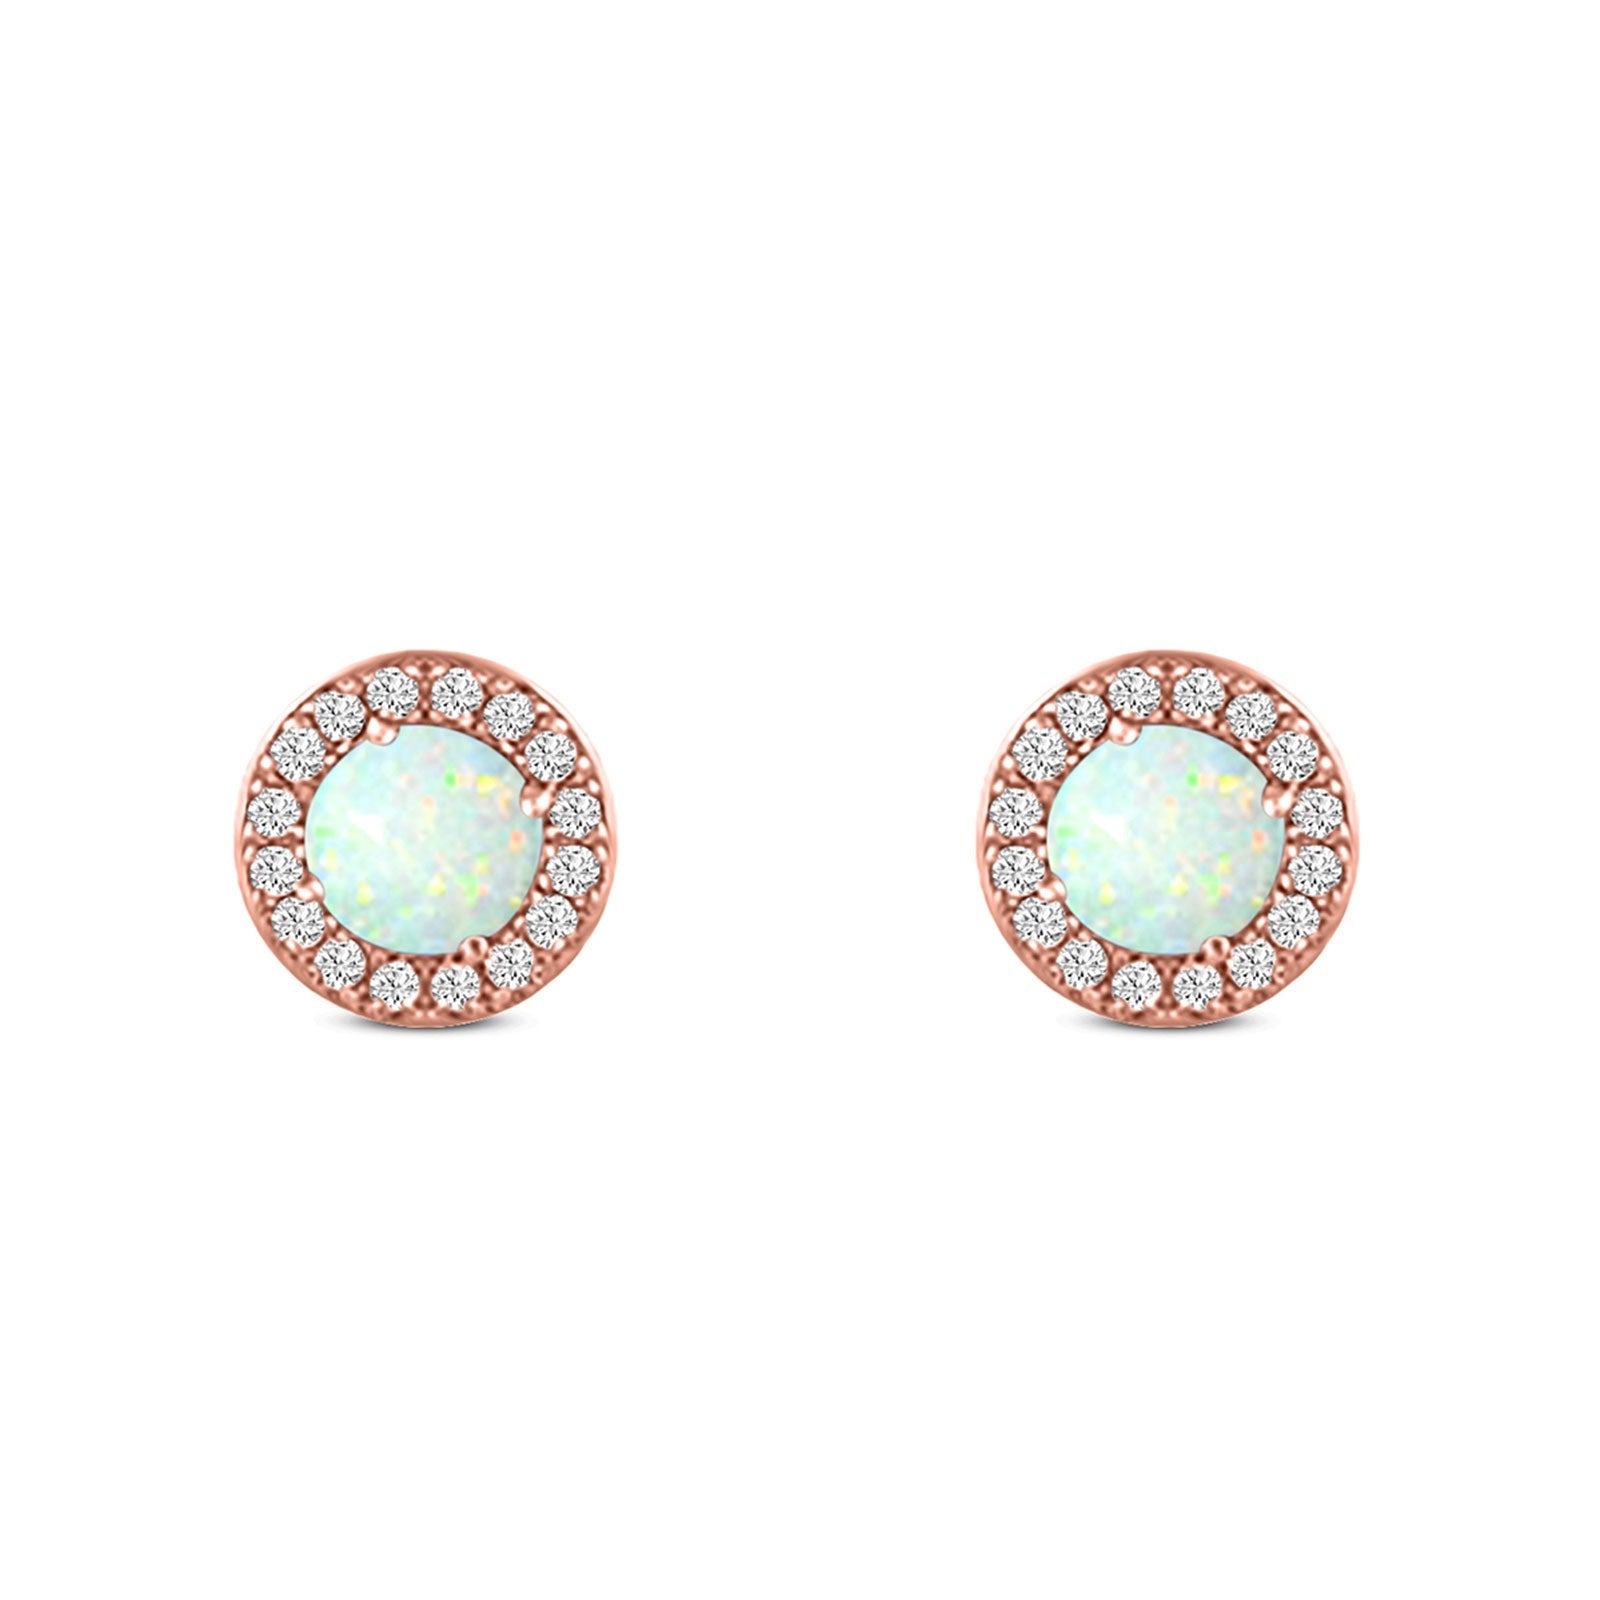 Halo Art Deco Stud Earring Round Simulated Cubic Zirconia Created Opal Solid 925 Sterling Silver (8.2mm)